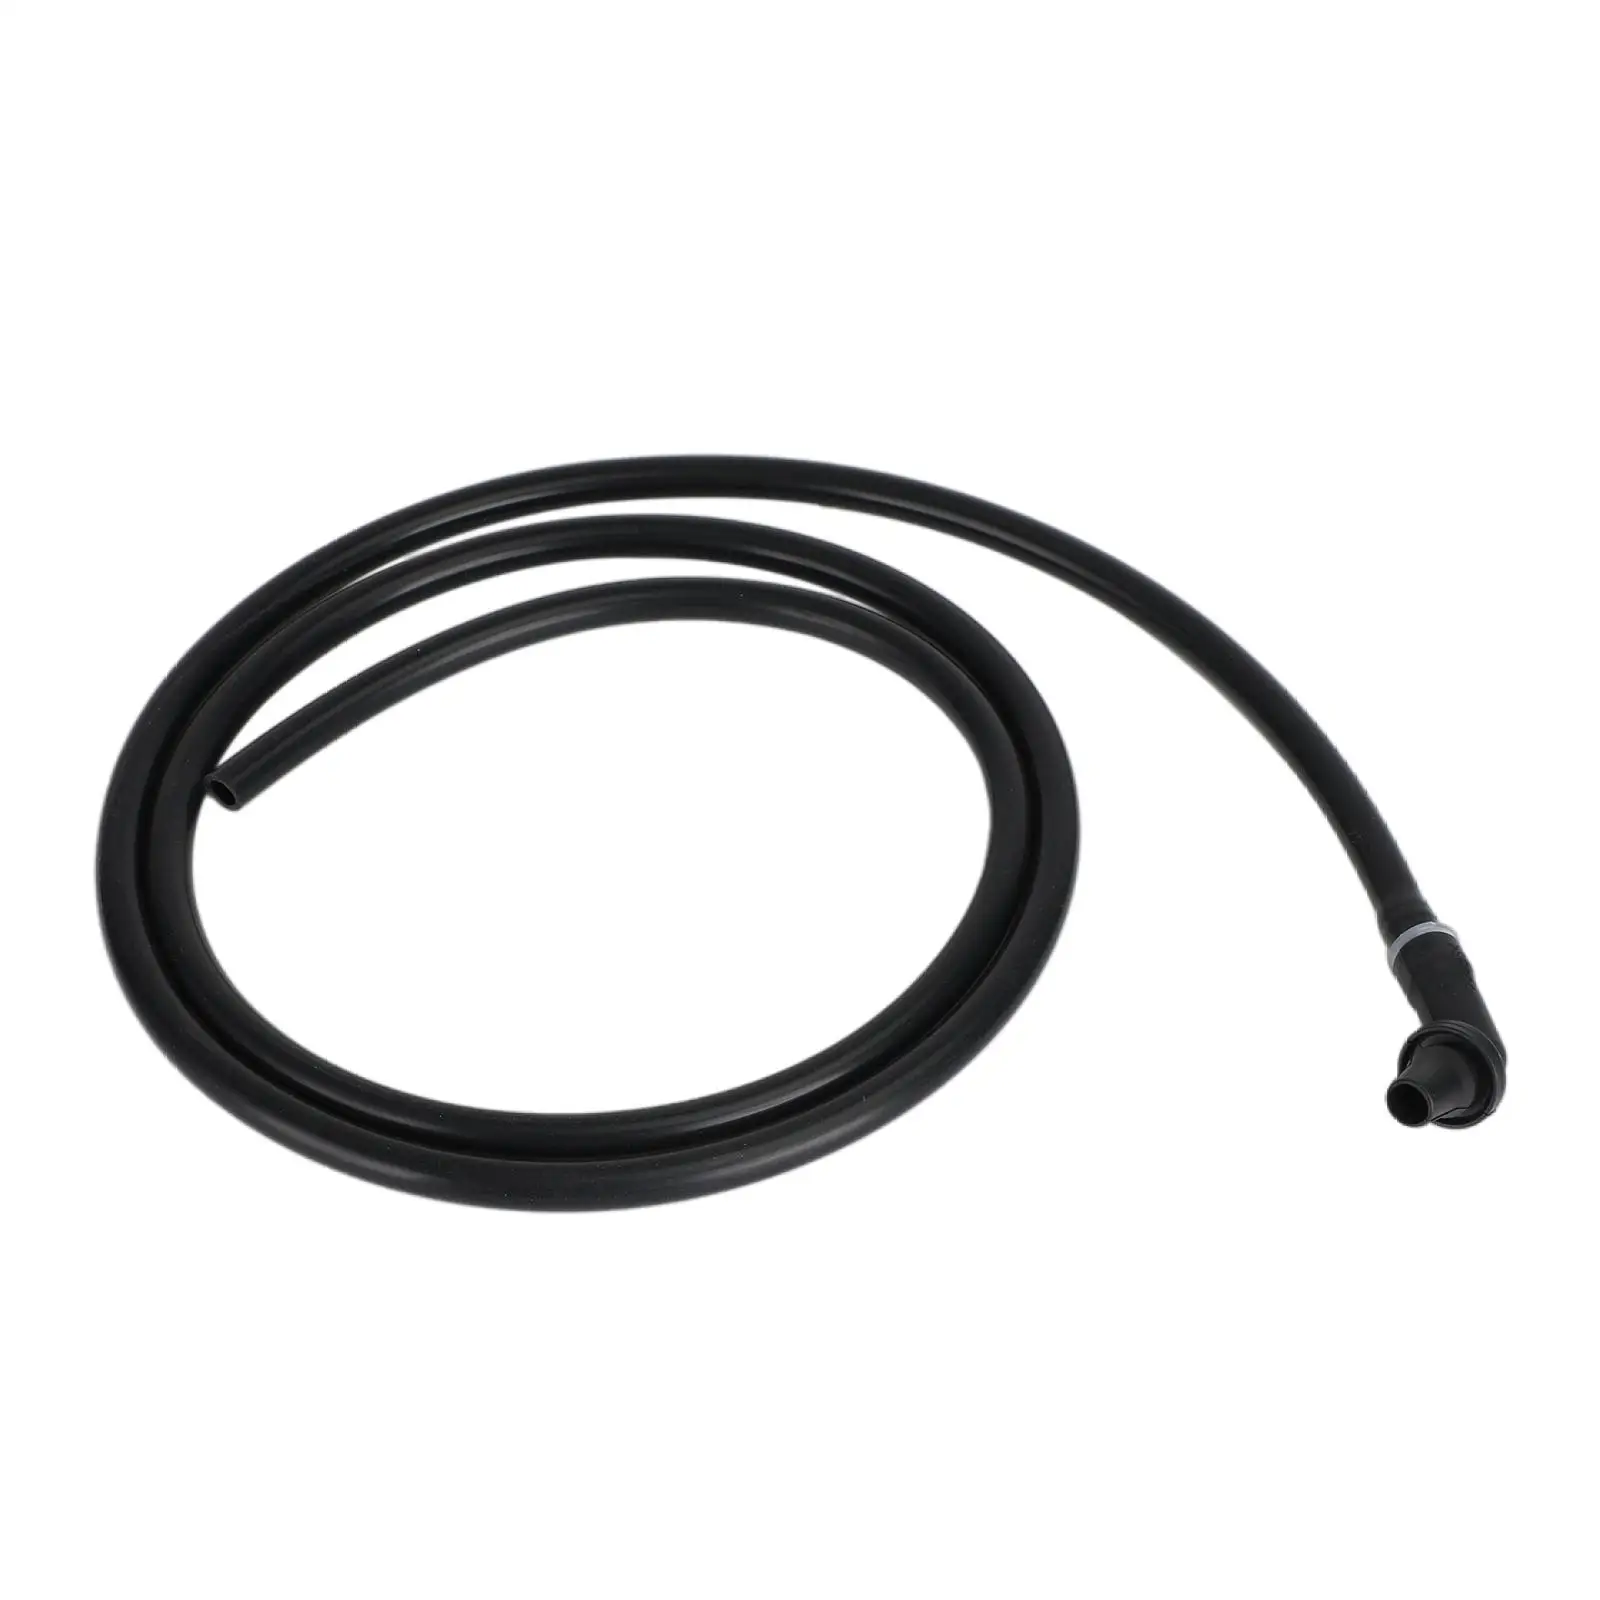 Drain Hose for Front Sunroof Water Pipe Eeh500100 Suitable for